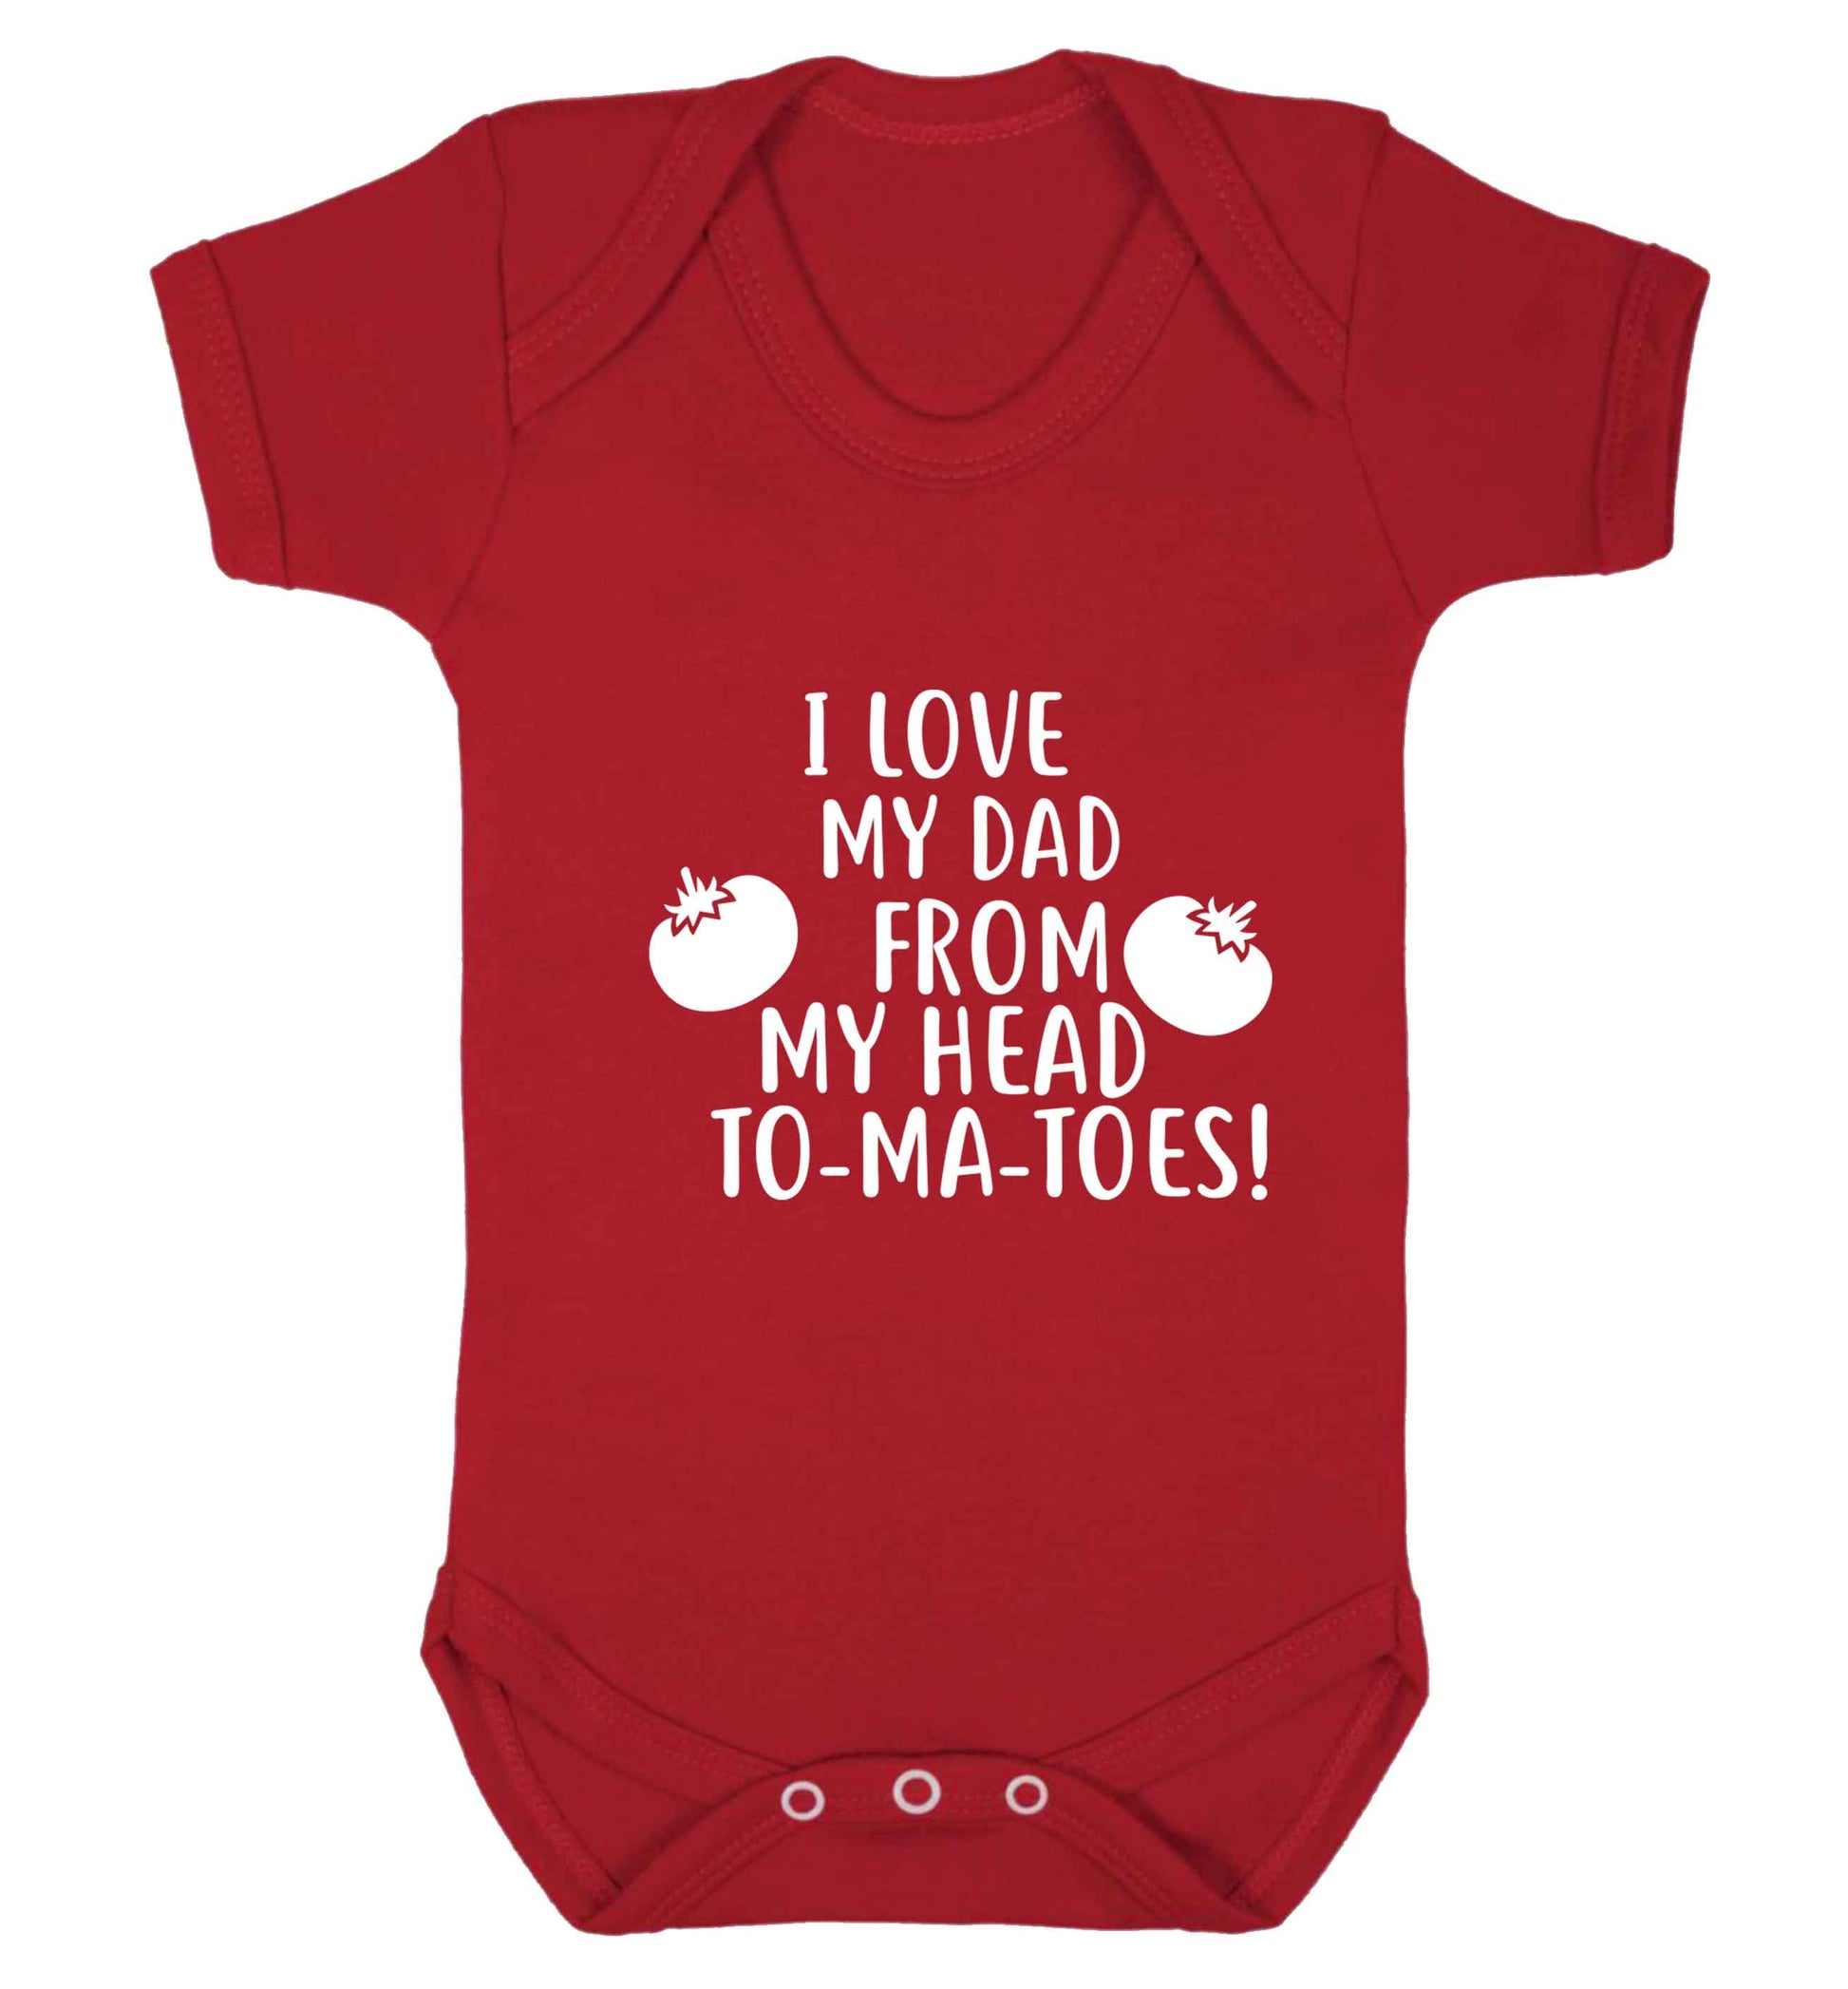 I love my dad from my head to-ma-toes baby vest red 18-24 months